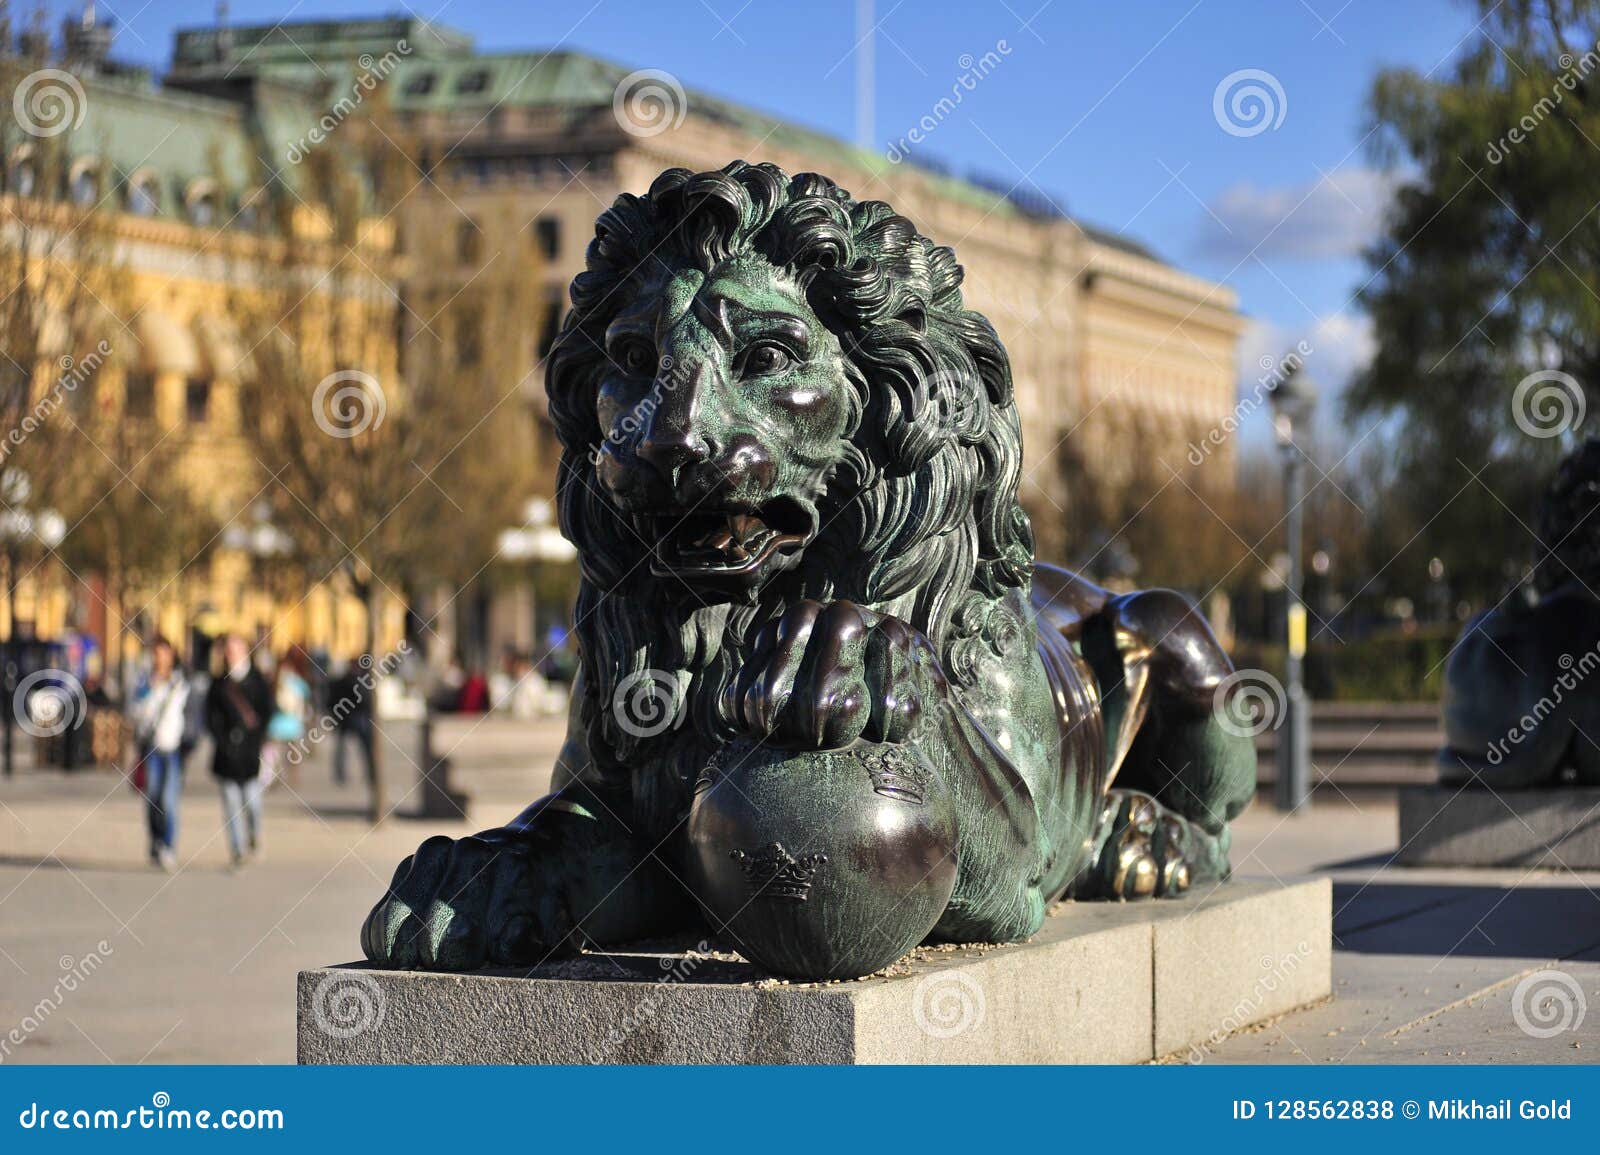 dokumentarfilm astronaut Kong Lear Copper Lying Lion with a Ball in Its Paw Stock Photo - Image of guard,  european: 128562838